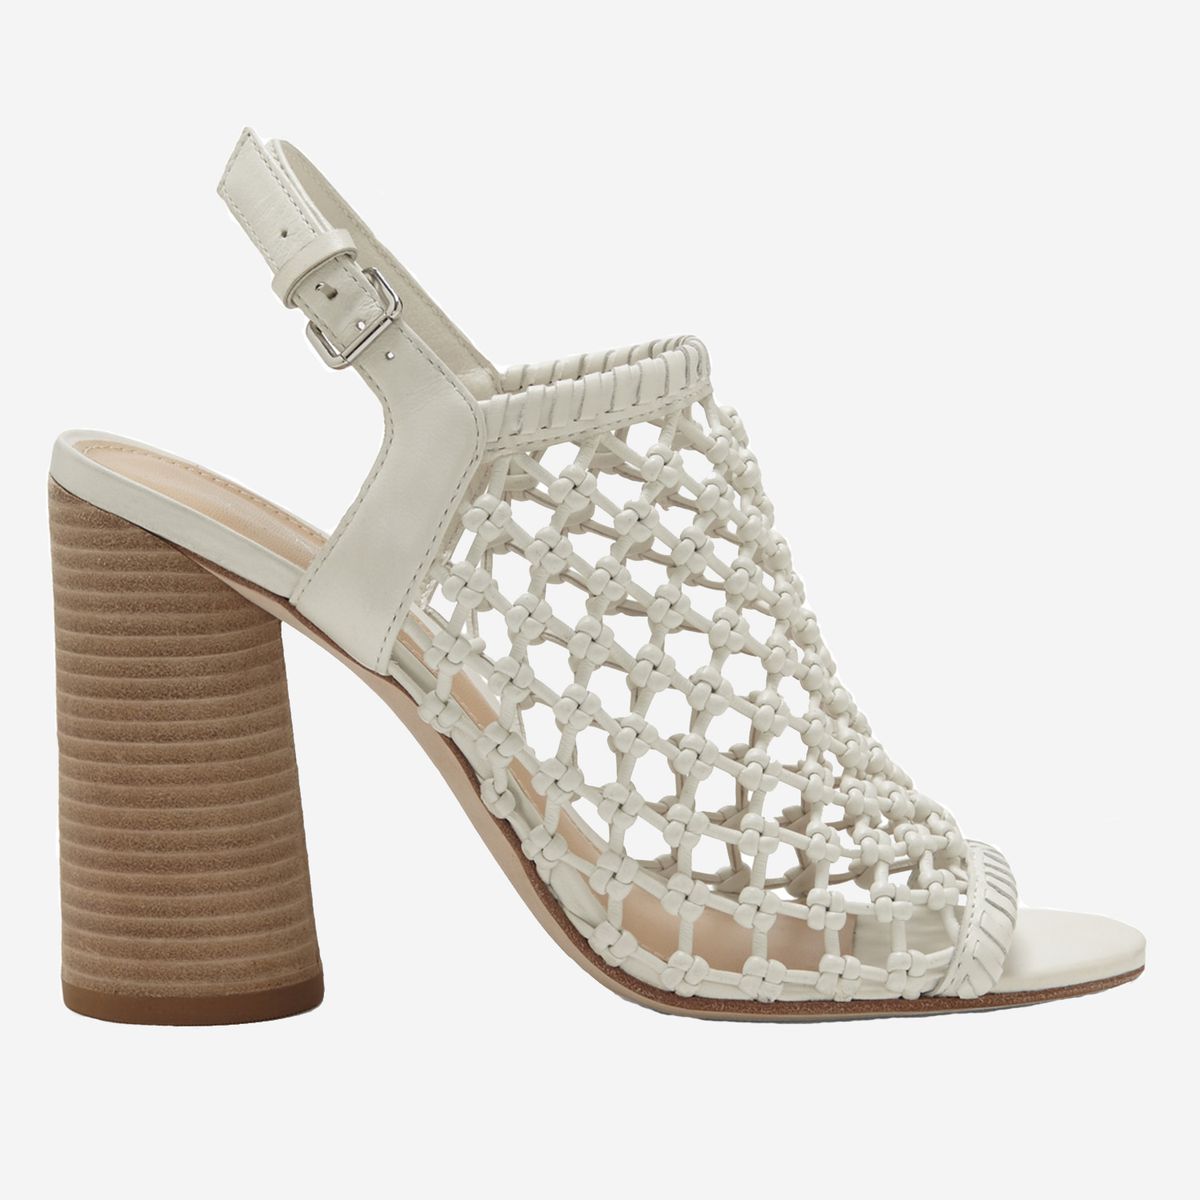 VC John Camuto Hollie Knotted Sandal, $195